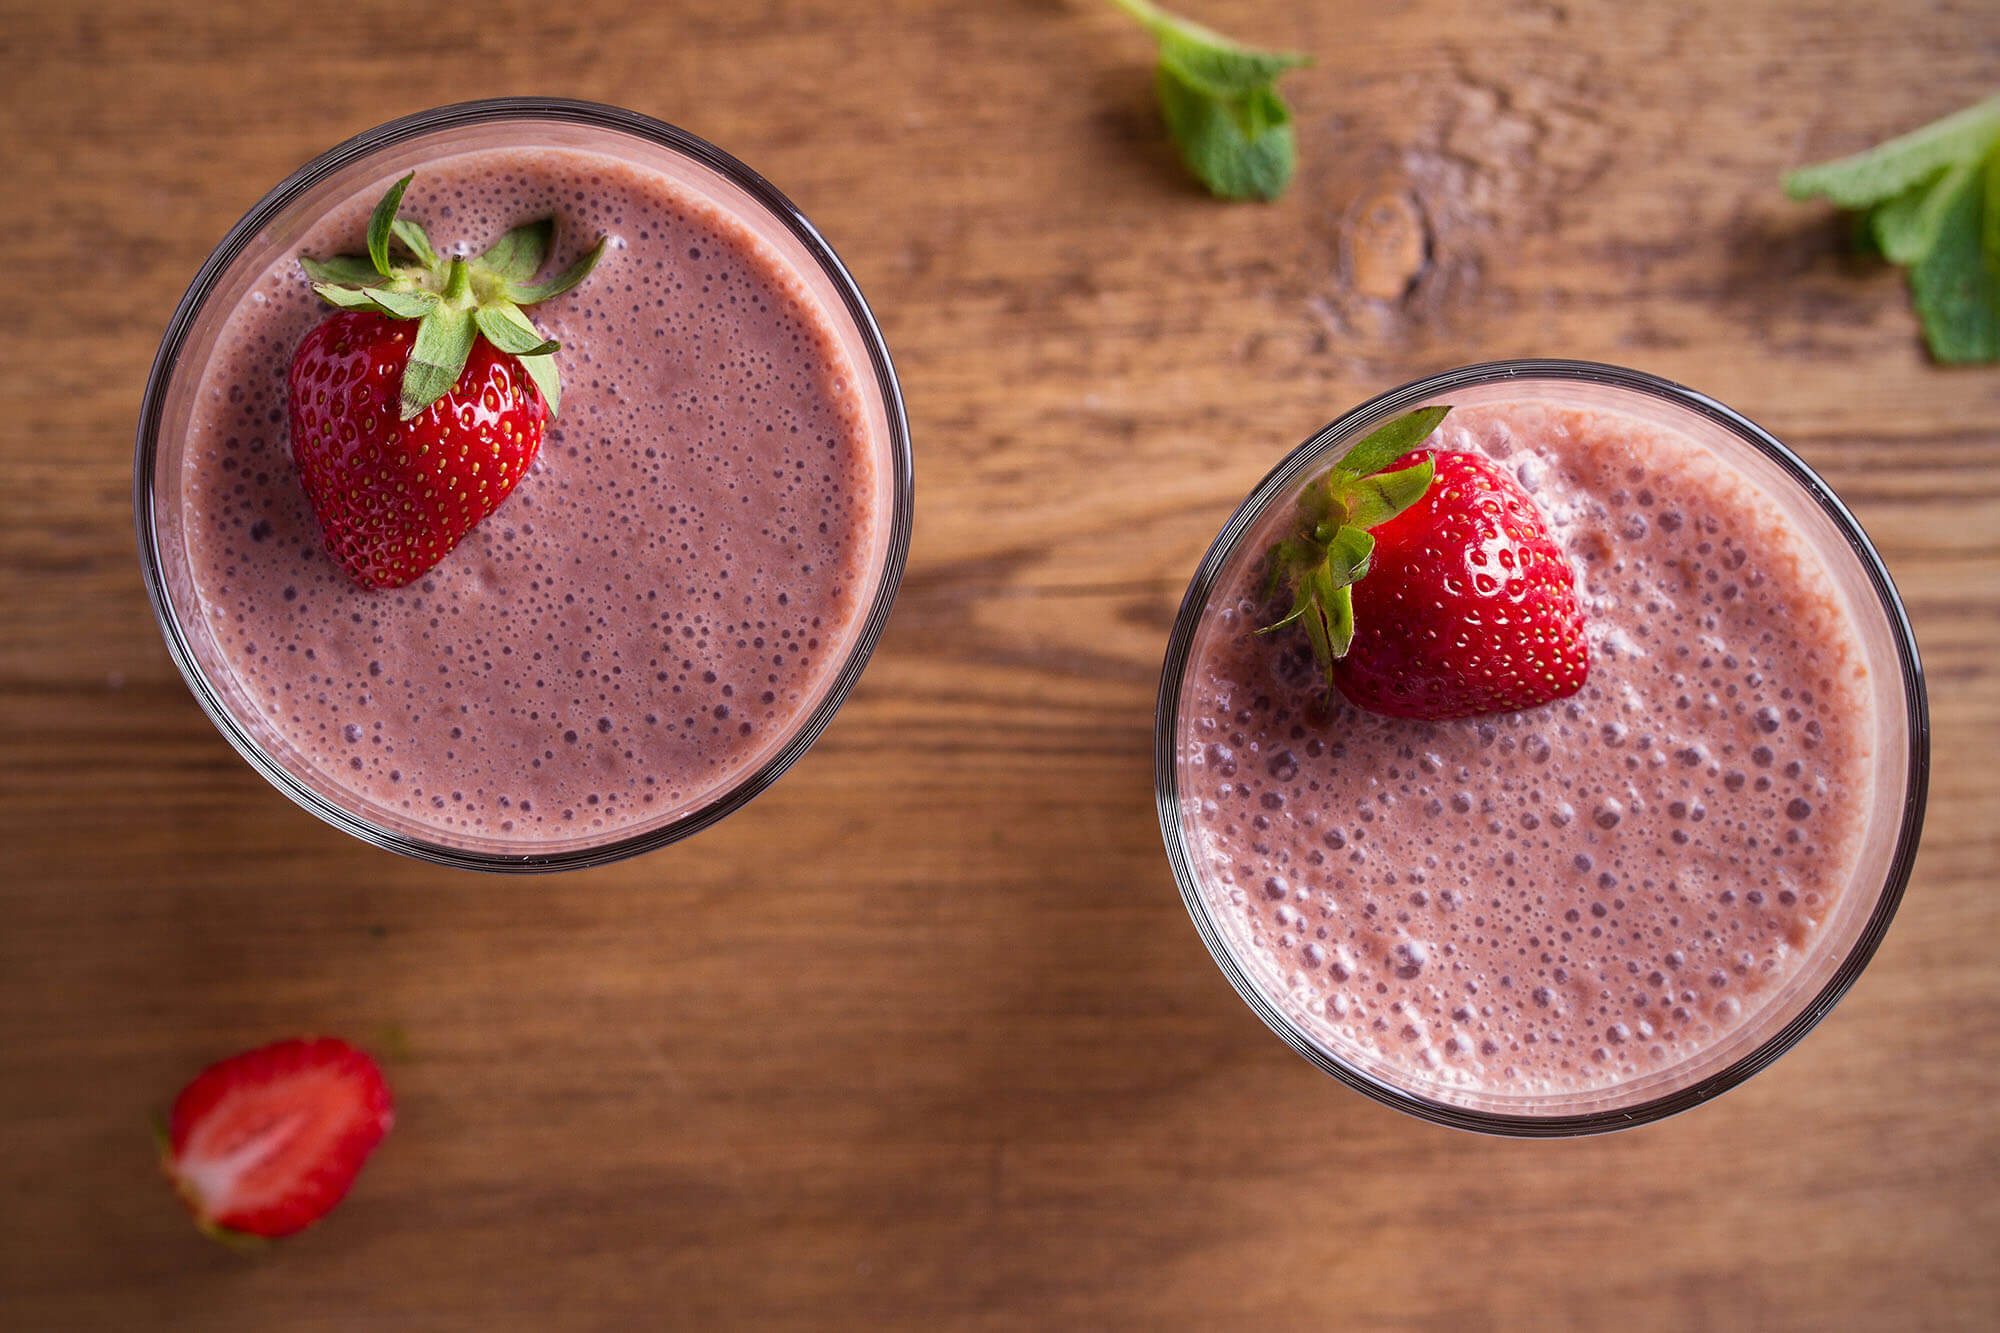 Simple & Healthy Strawberry Banana Smoothie with a Secret Immune Boost